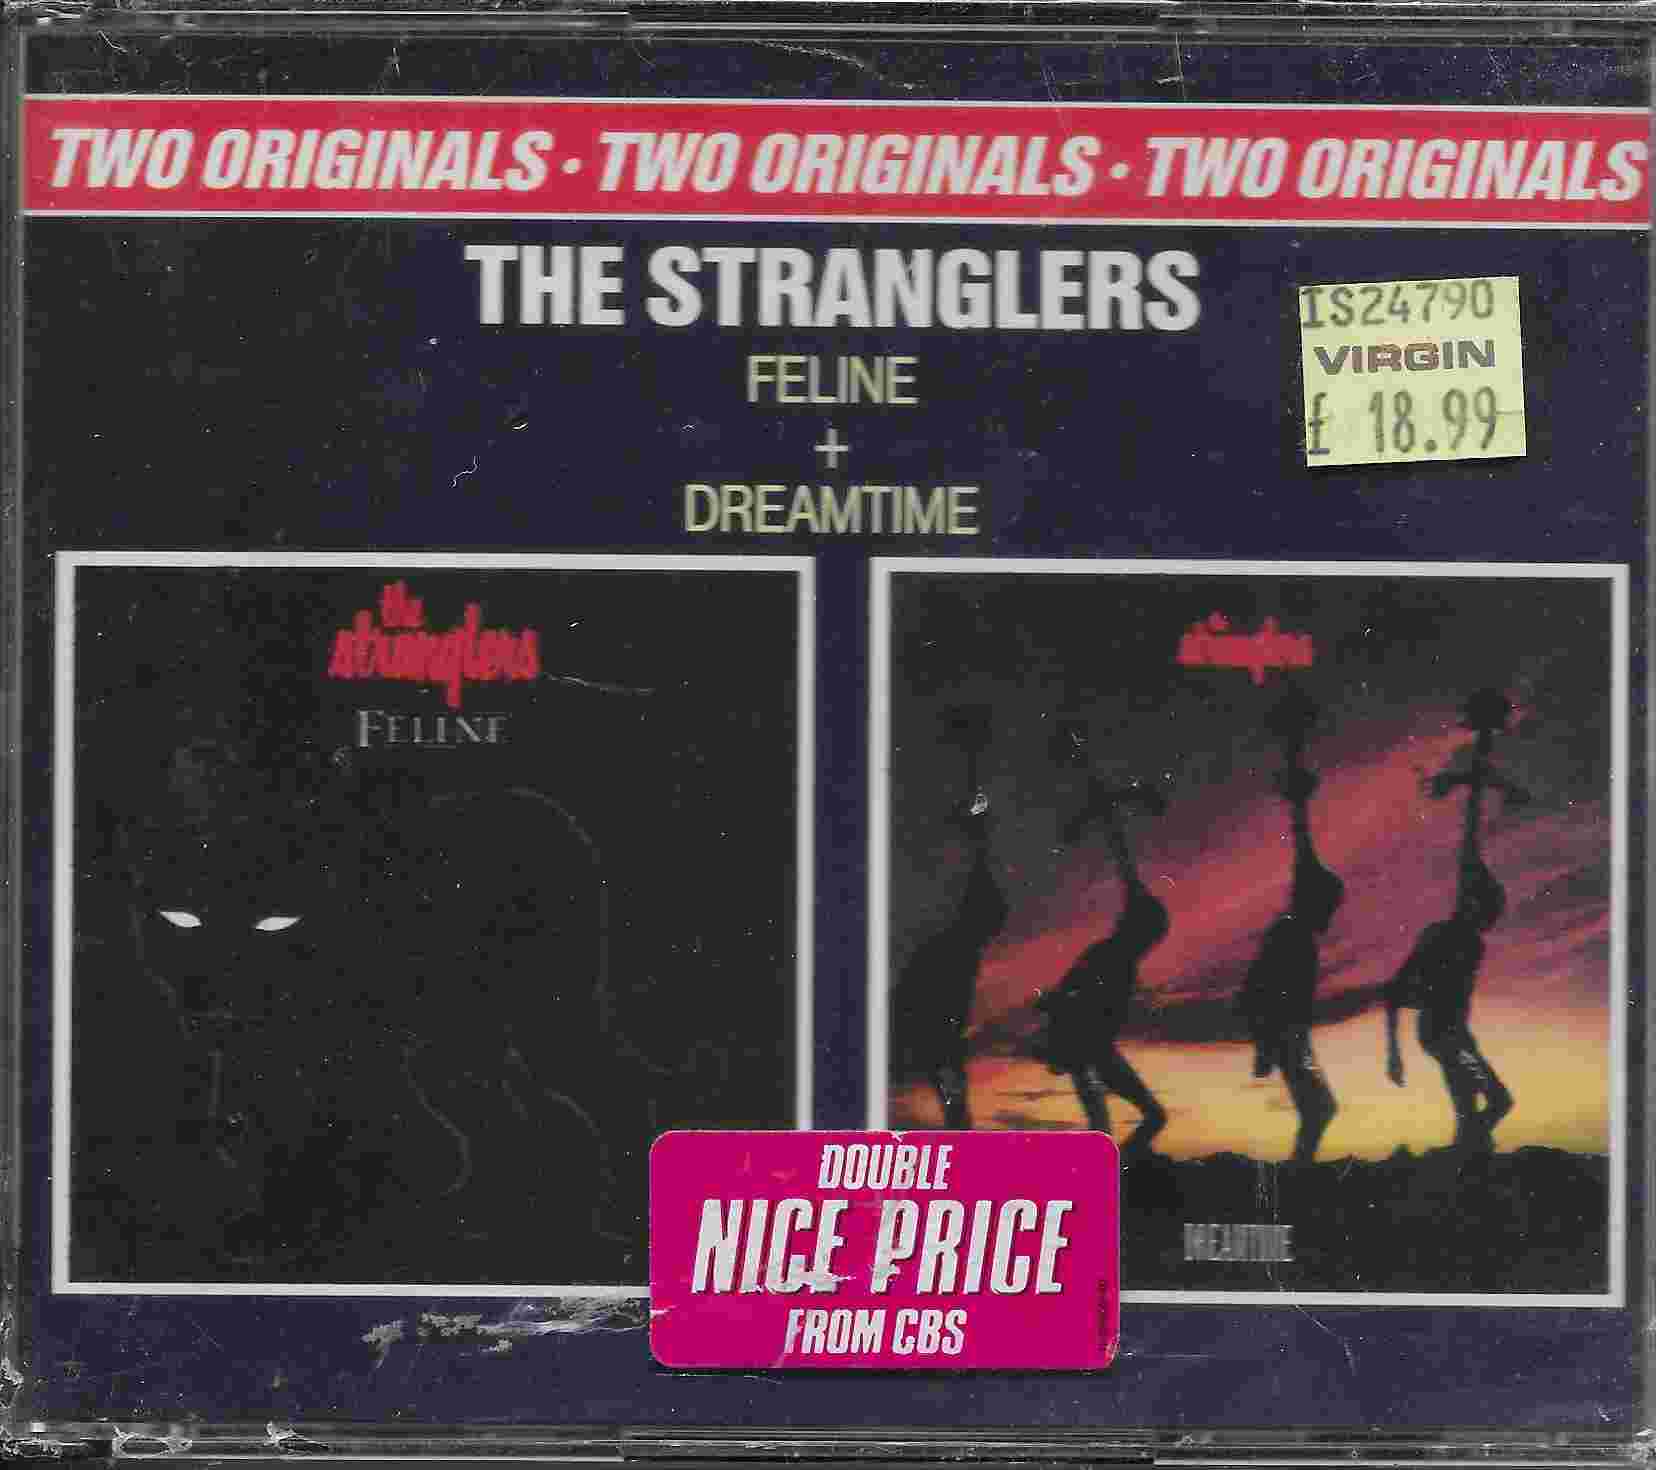 Picture of 466835 2 Feline / Dreamtime by artist The Stranglers 